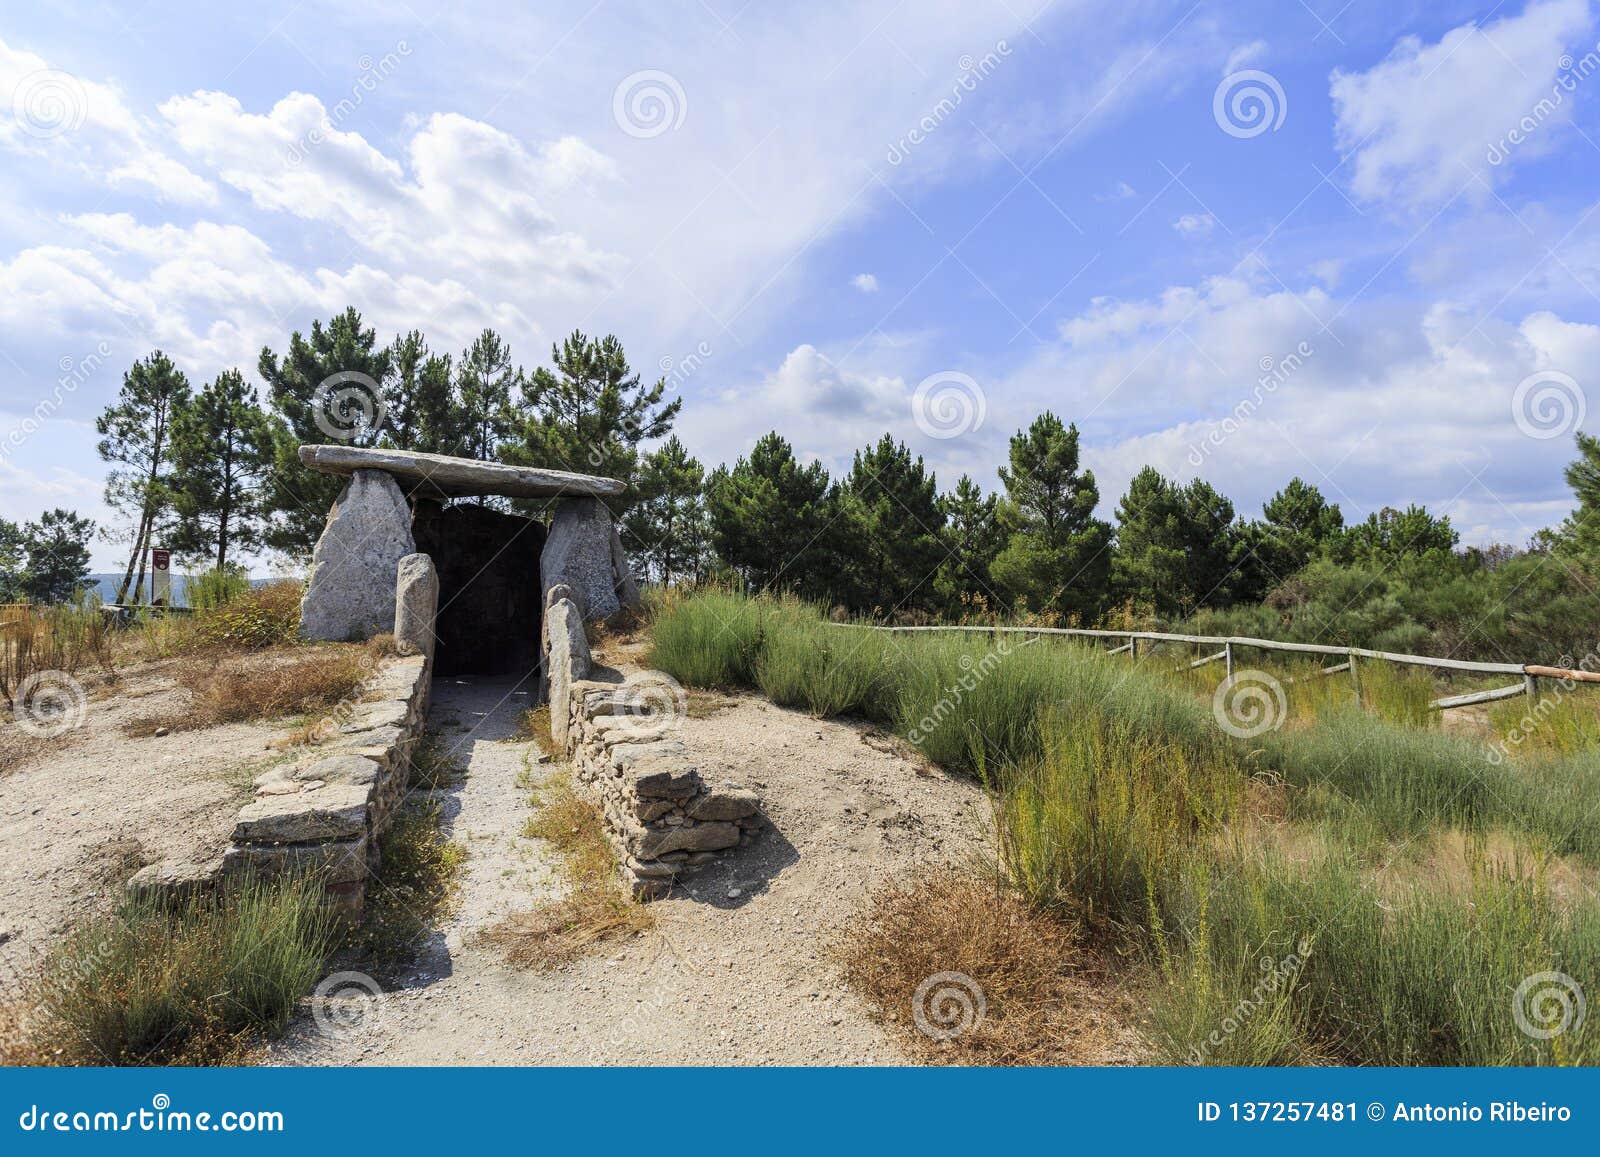 dolmen of cortico or dolmen of the house of the orca